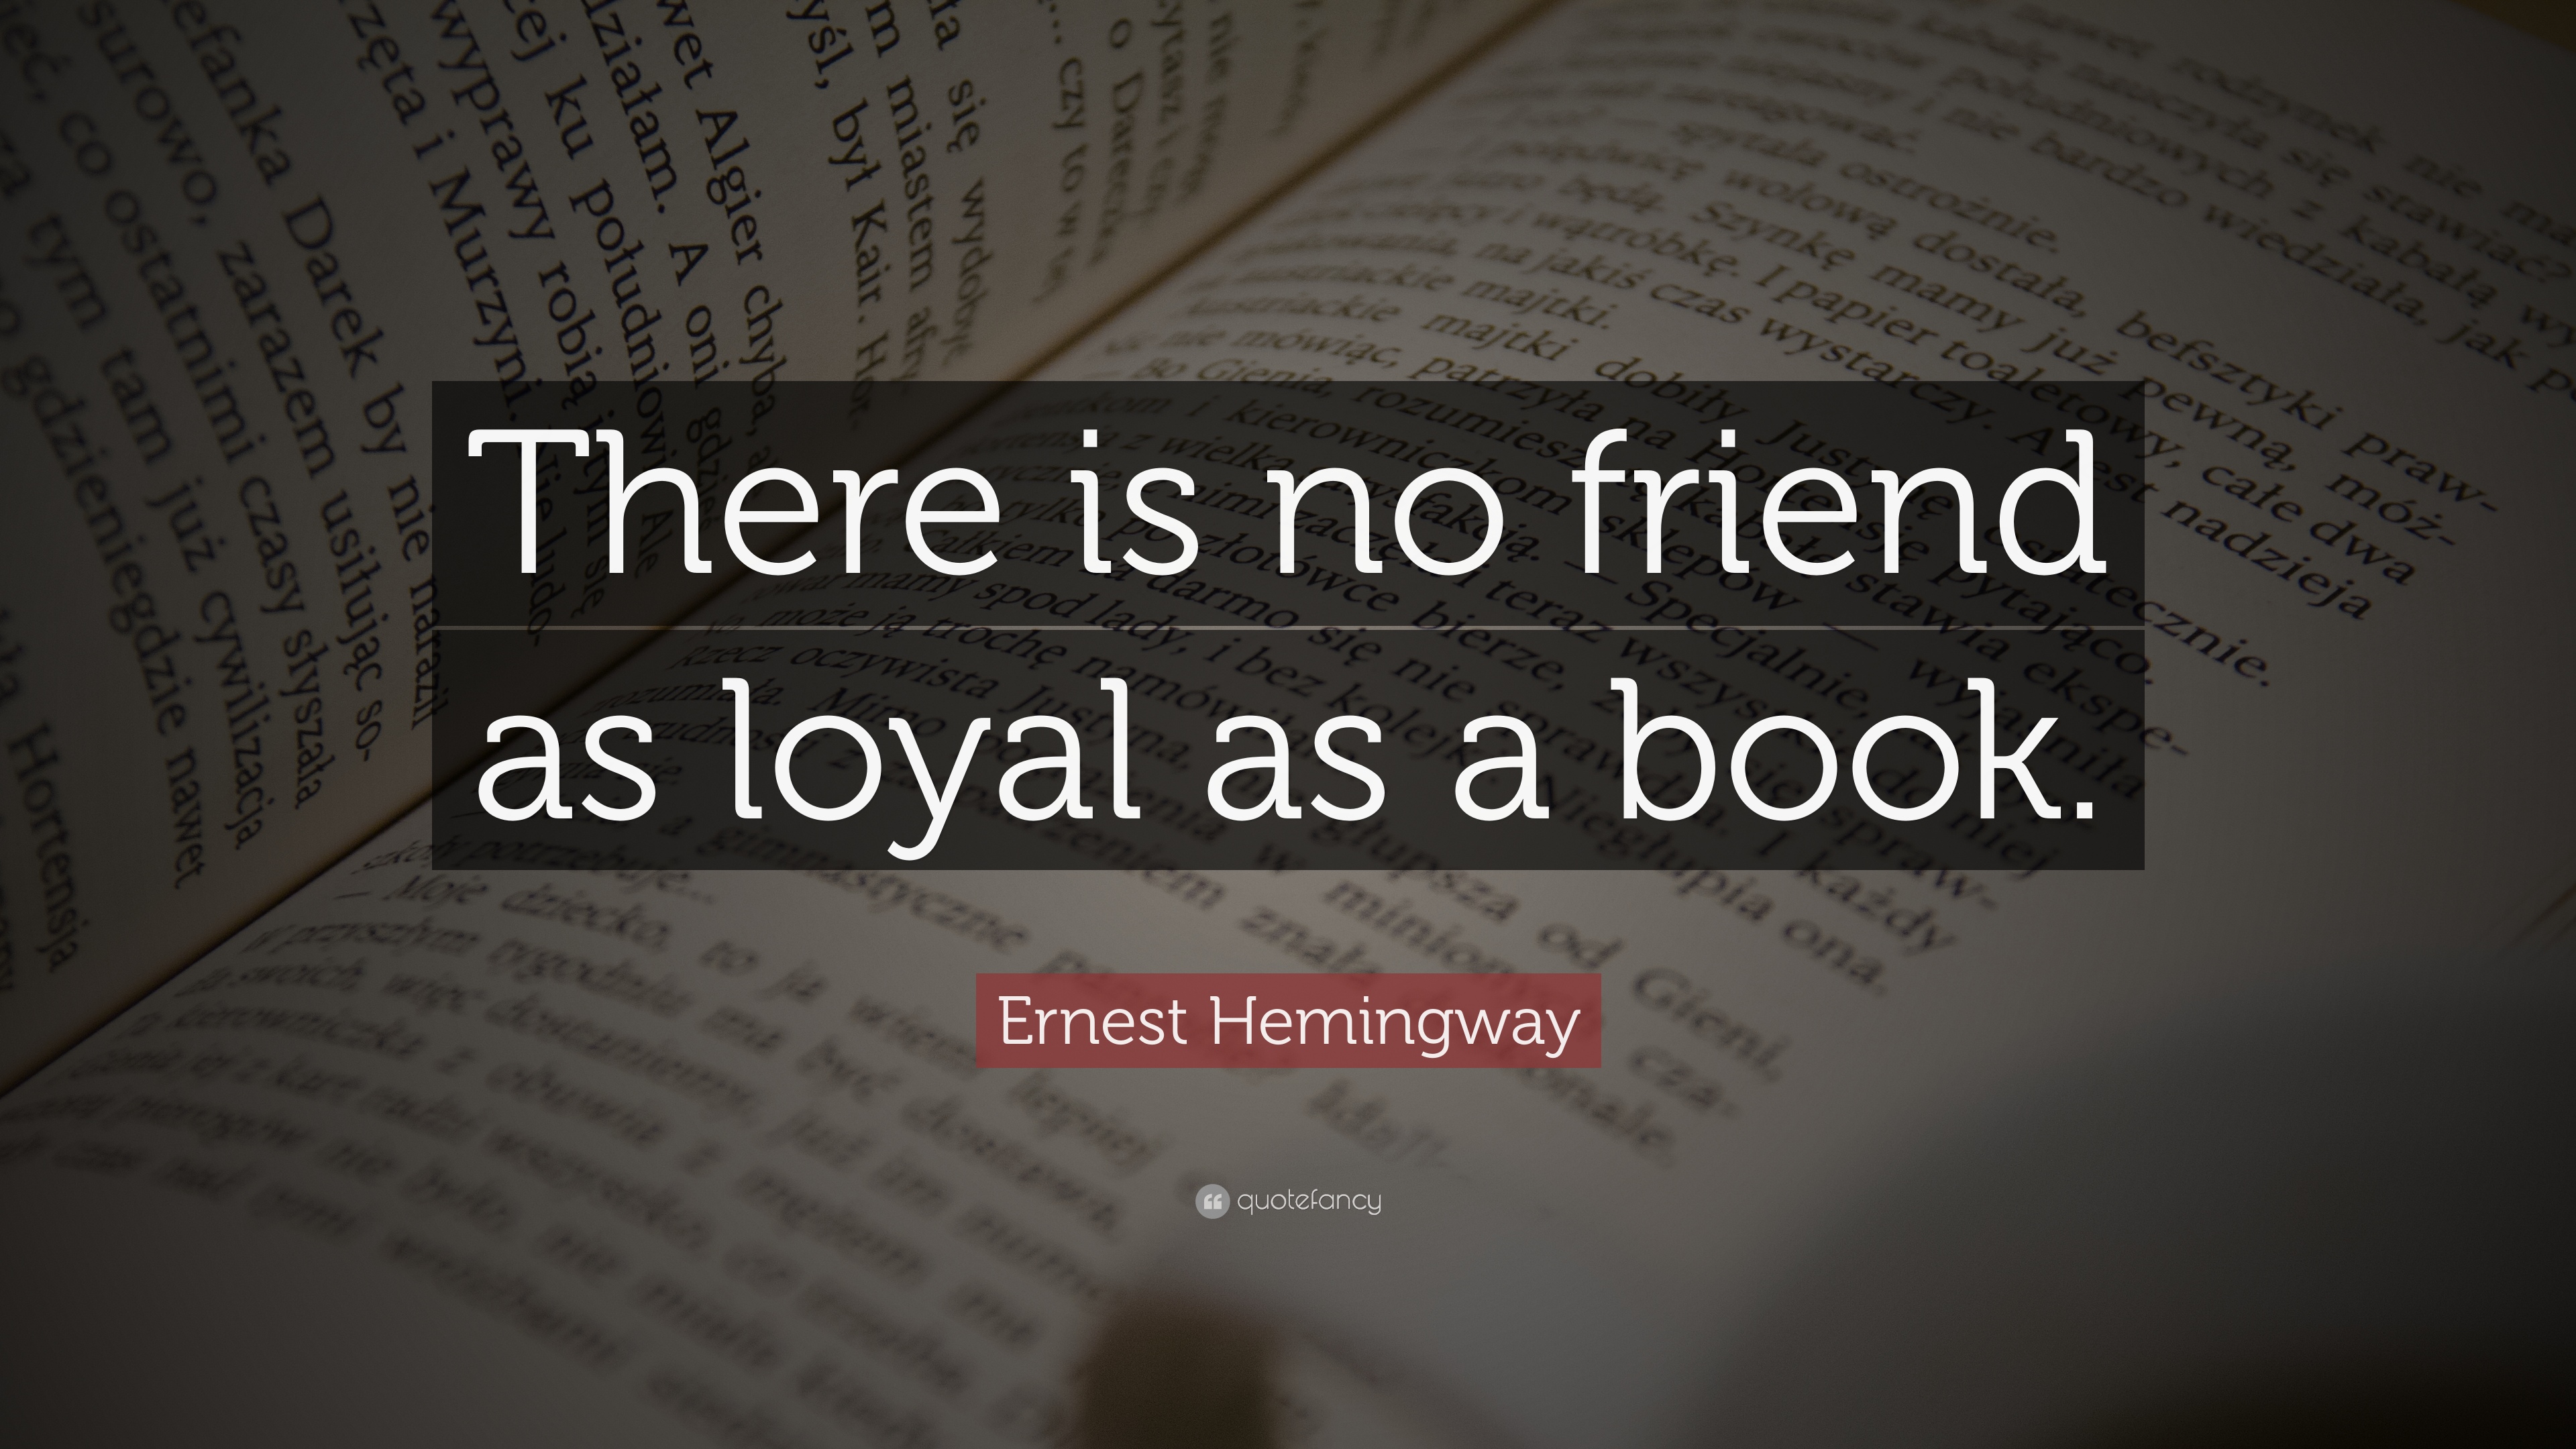 there is no friend as loyal as a book. ernest hemingway